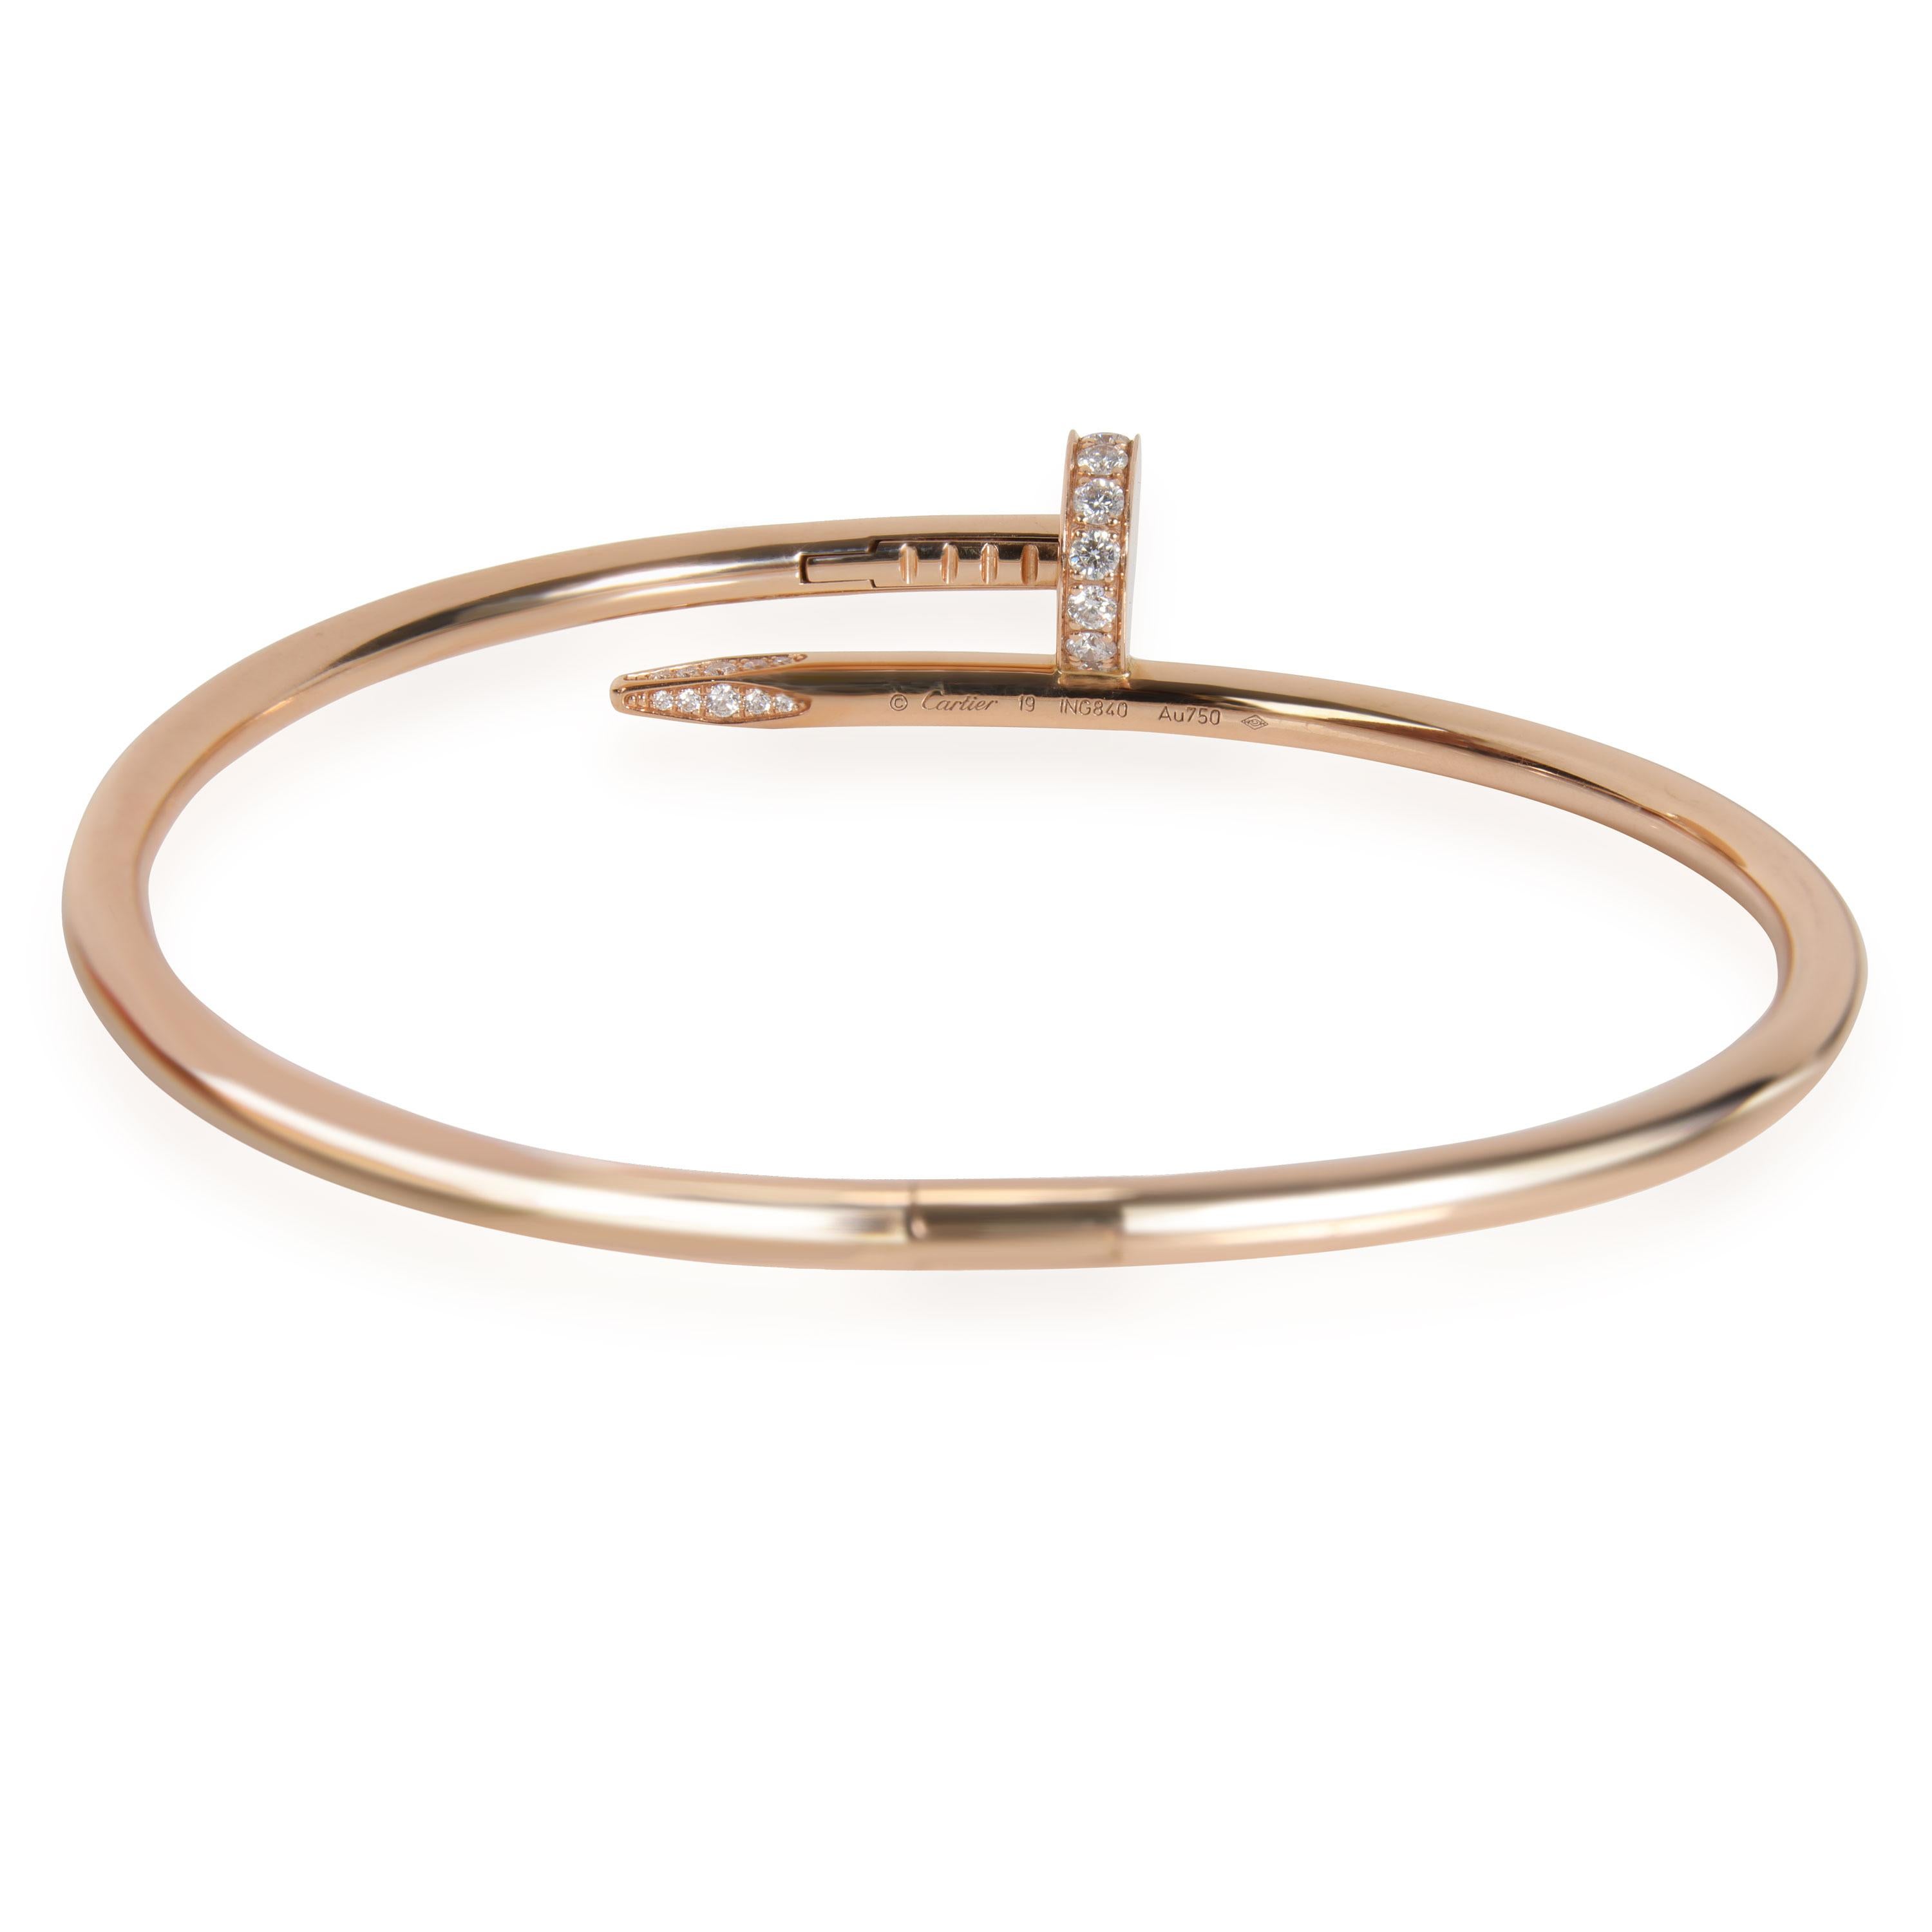 Cartier Juste un Clou Diamond Bracelet in 18K Pink Gold 0.59 CTW

PRIMARY DETAILS
SKU: 110492
Listing Title: Cartier Juste un Clou Diamond Bracelet in 18K Pink Gold 0.59 CTW

Retails for 12,500 USD. In excellent condition and recently polished.